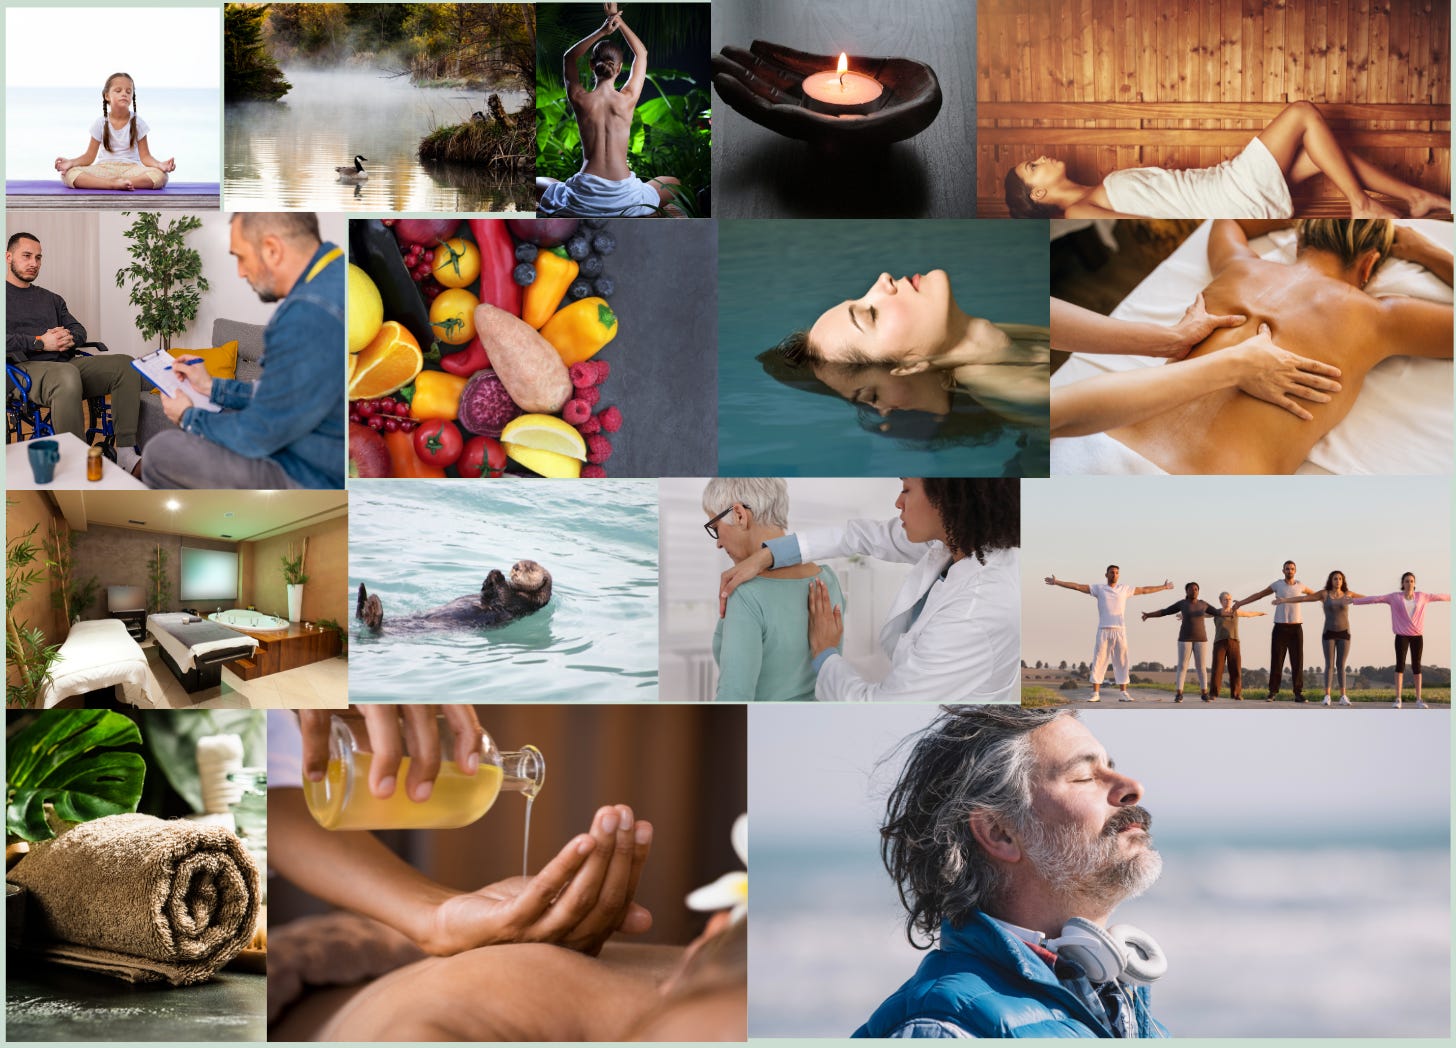 Collage of pictures of the experience of wellness and wellbeing and related activities